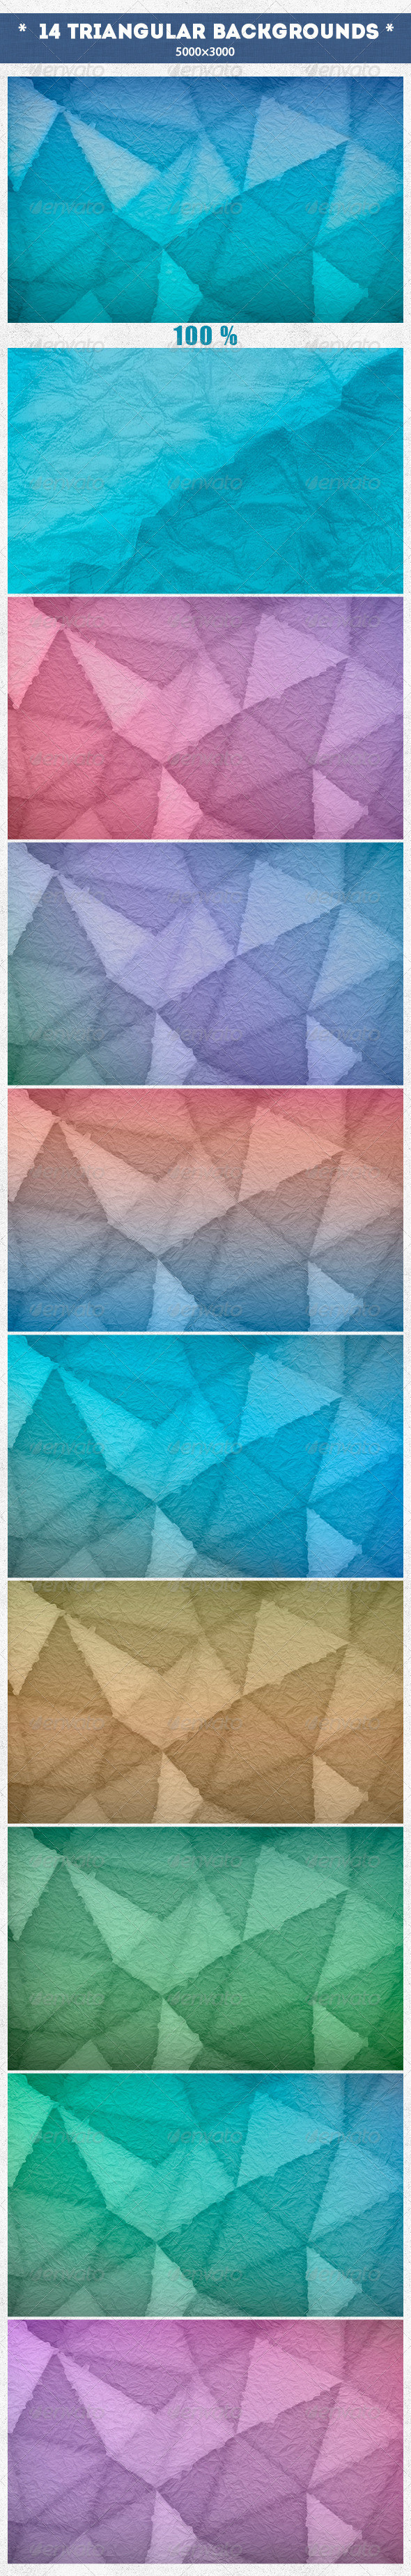 Title 14 triangular backgrounds